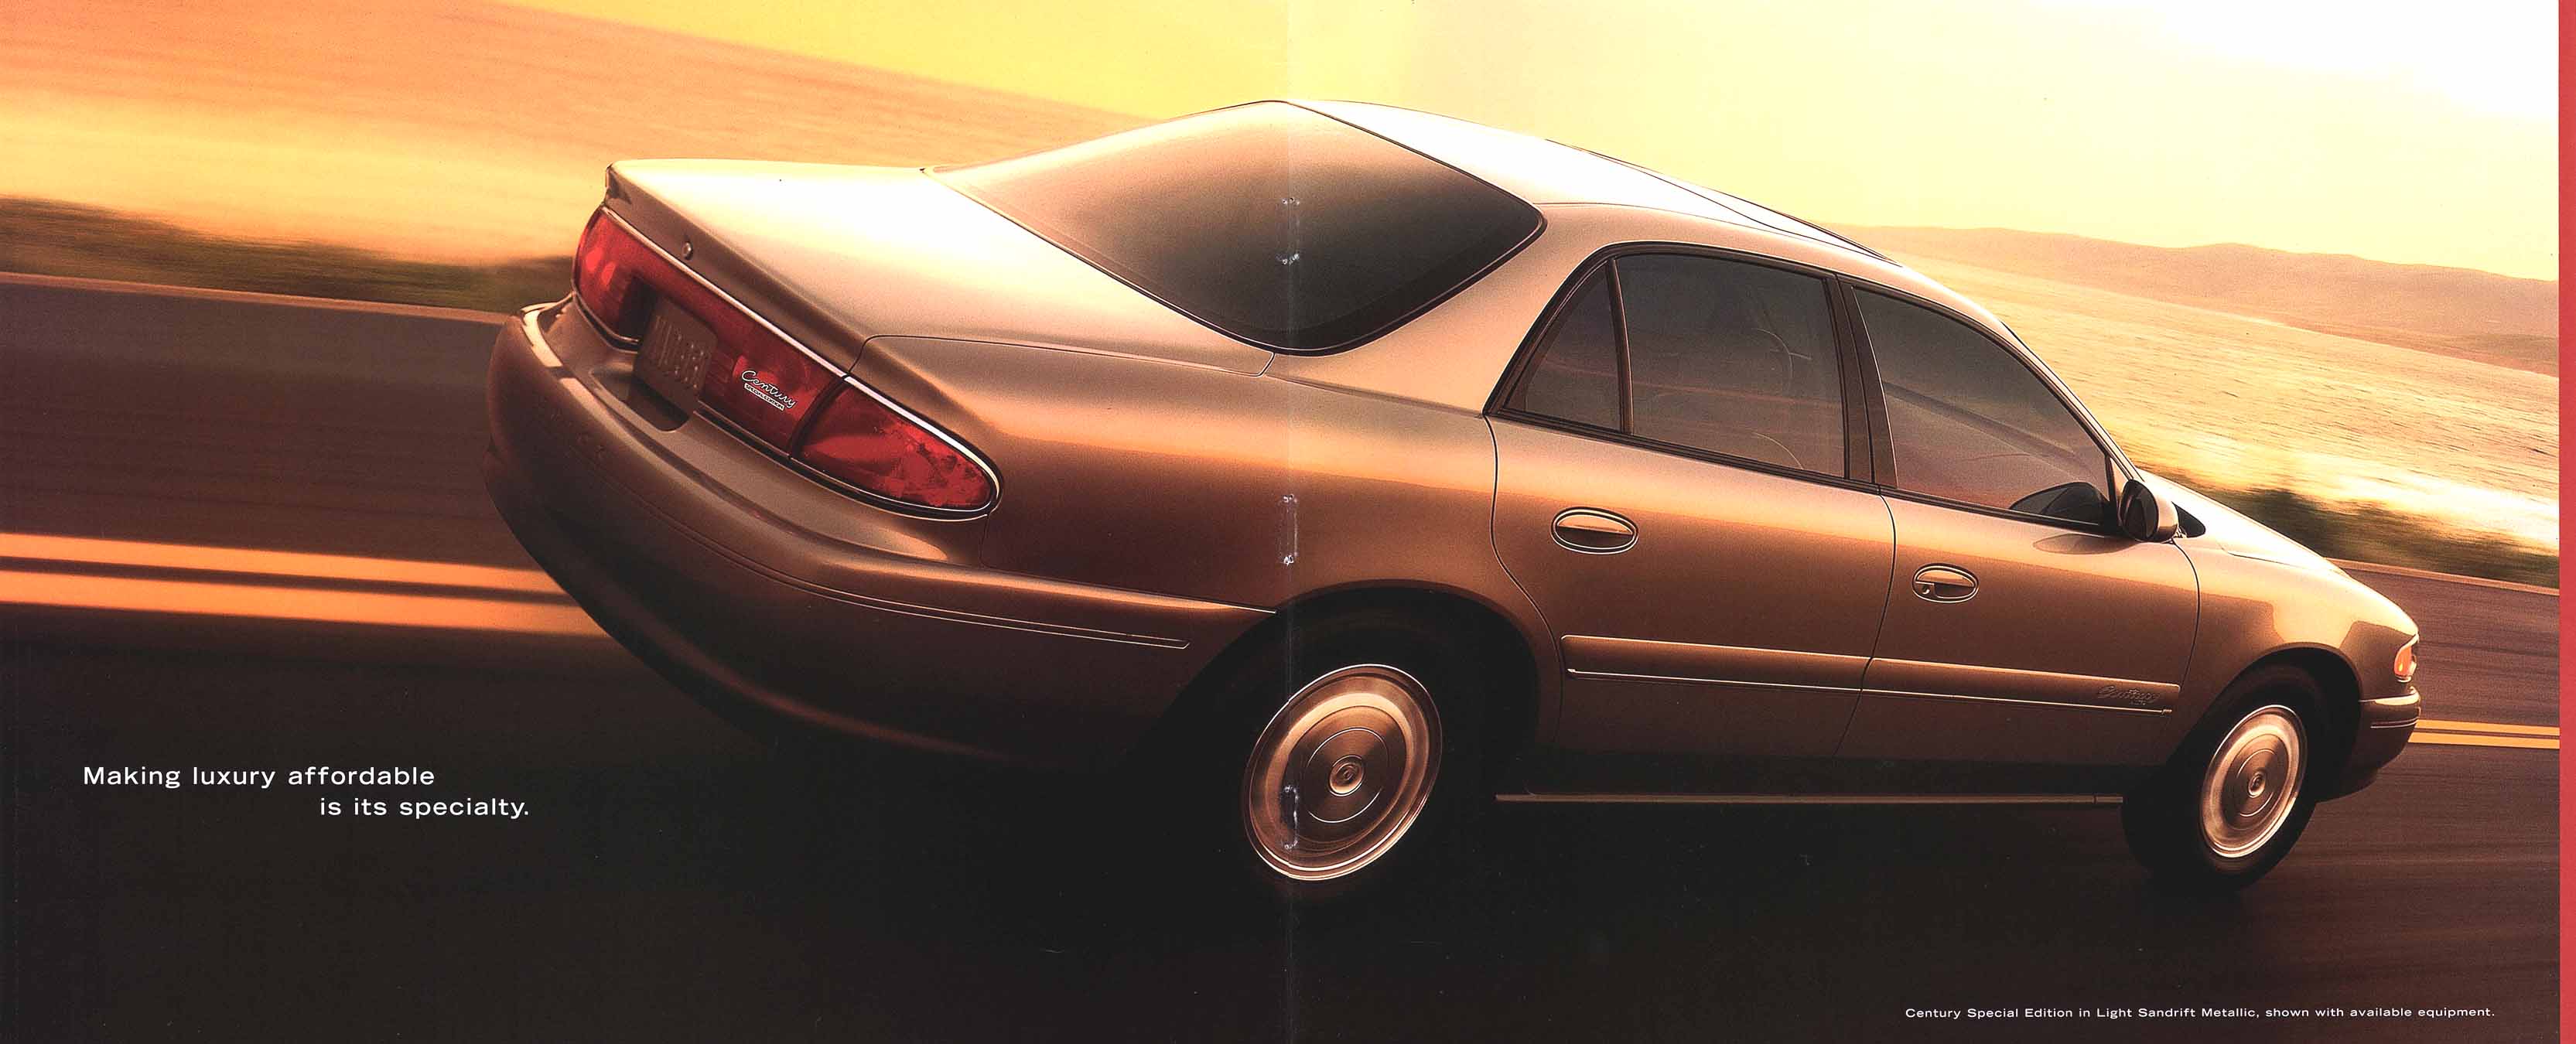 02buickcent04-05